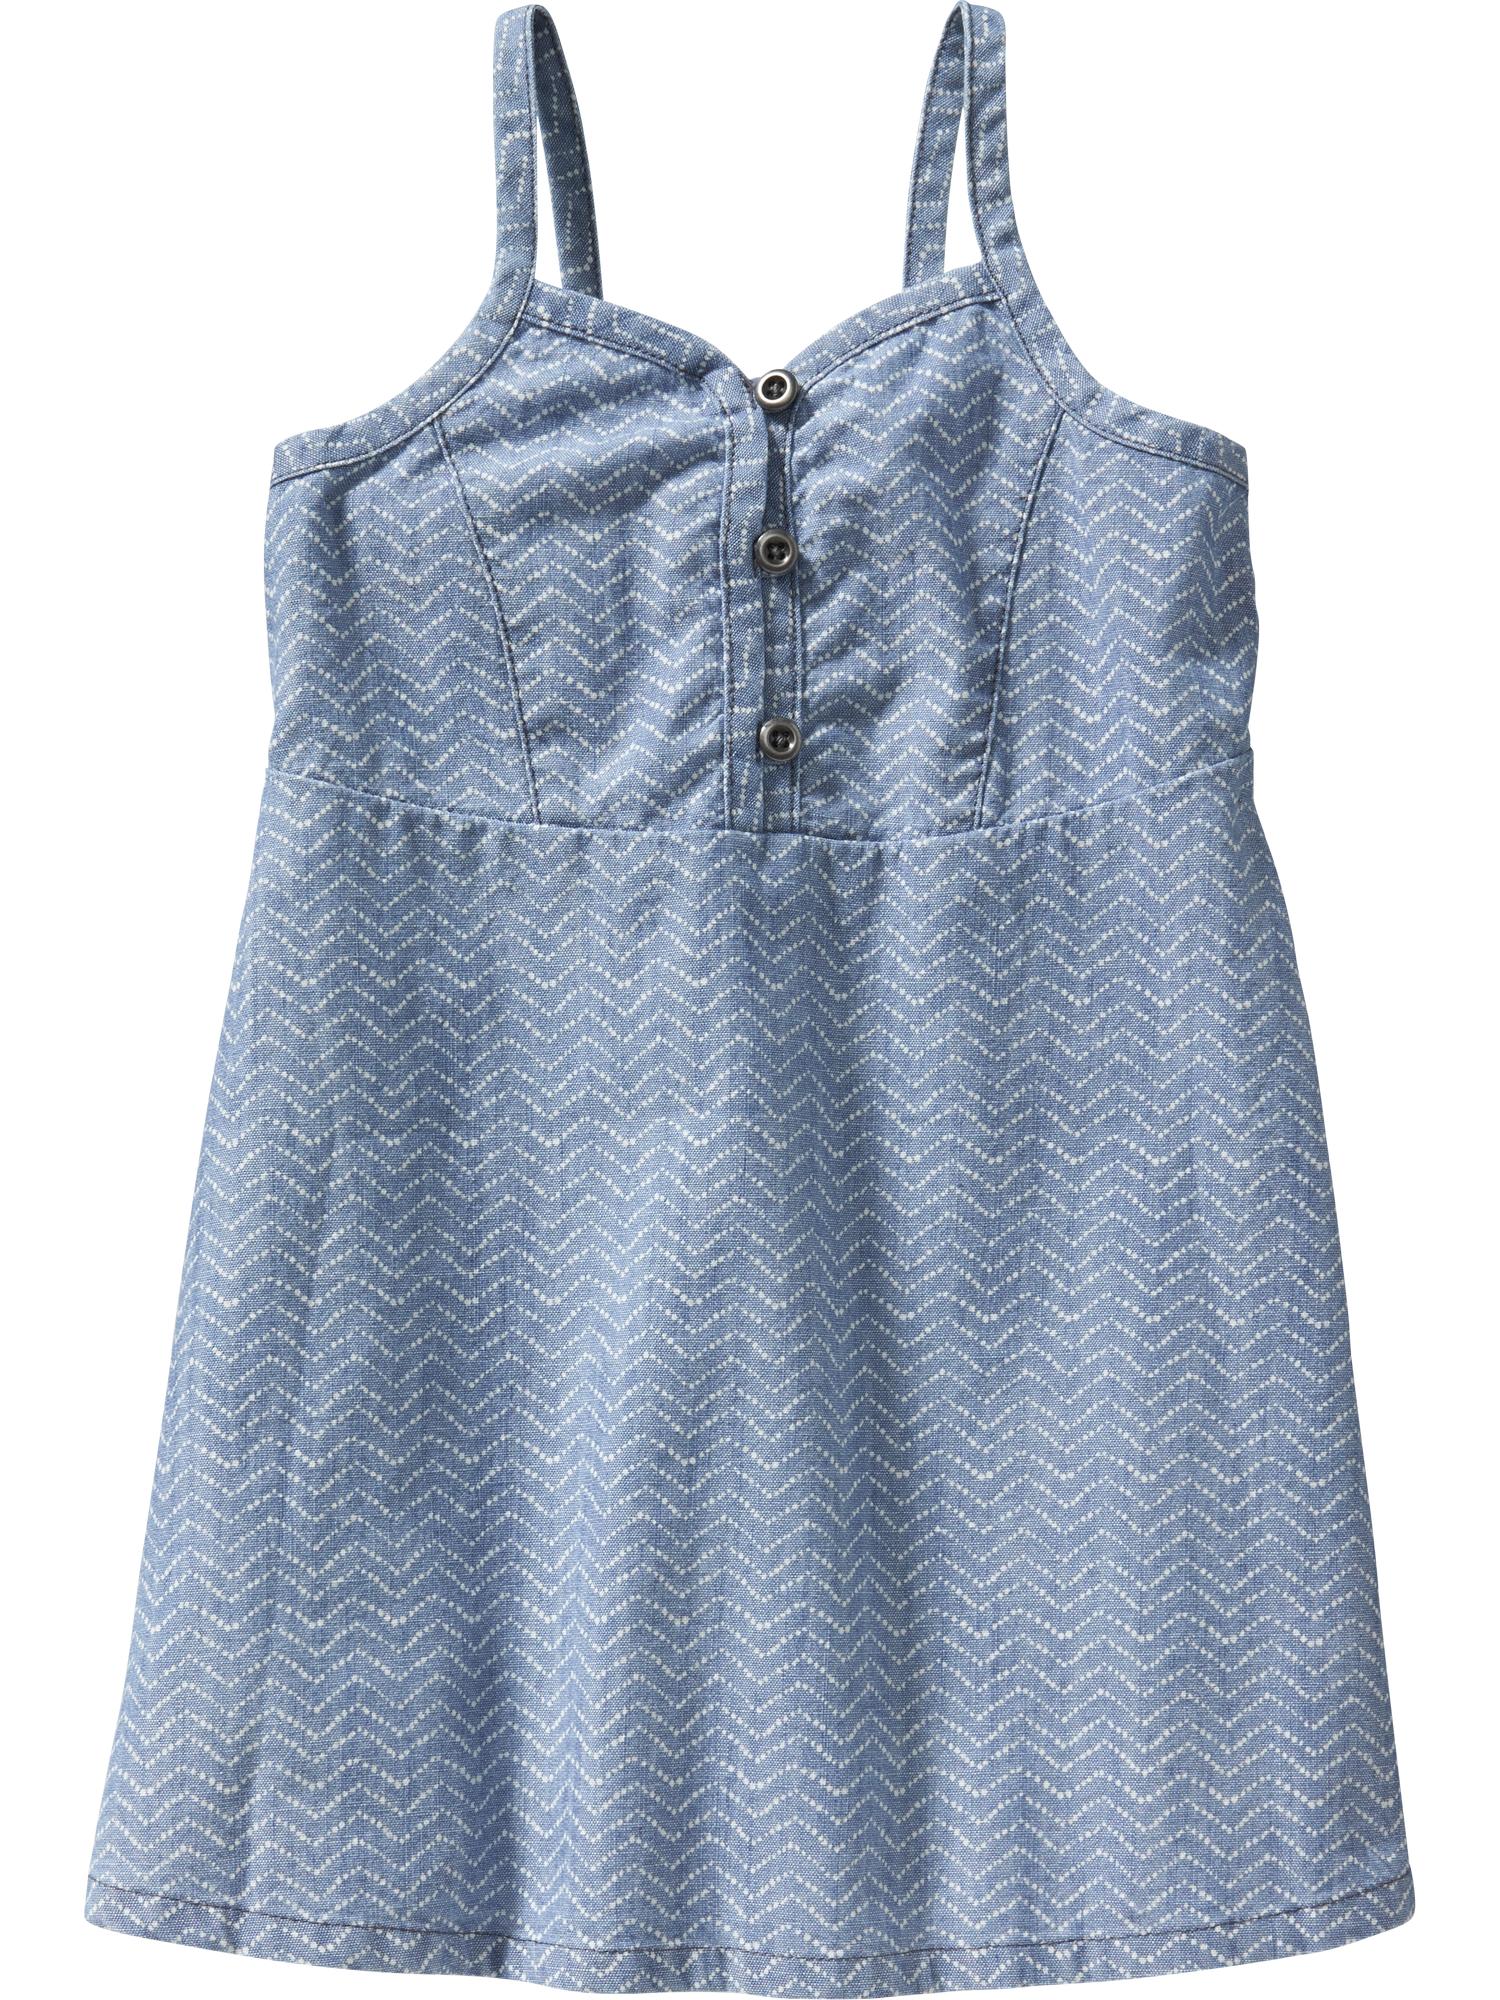 Chambray Sundresses for Baby | Old Navy